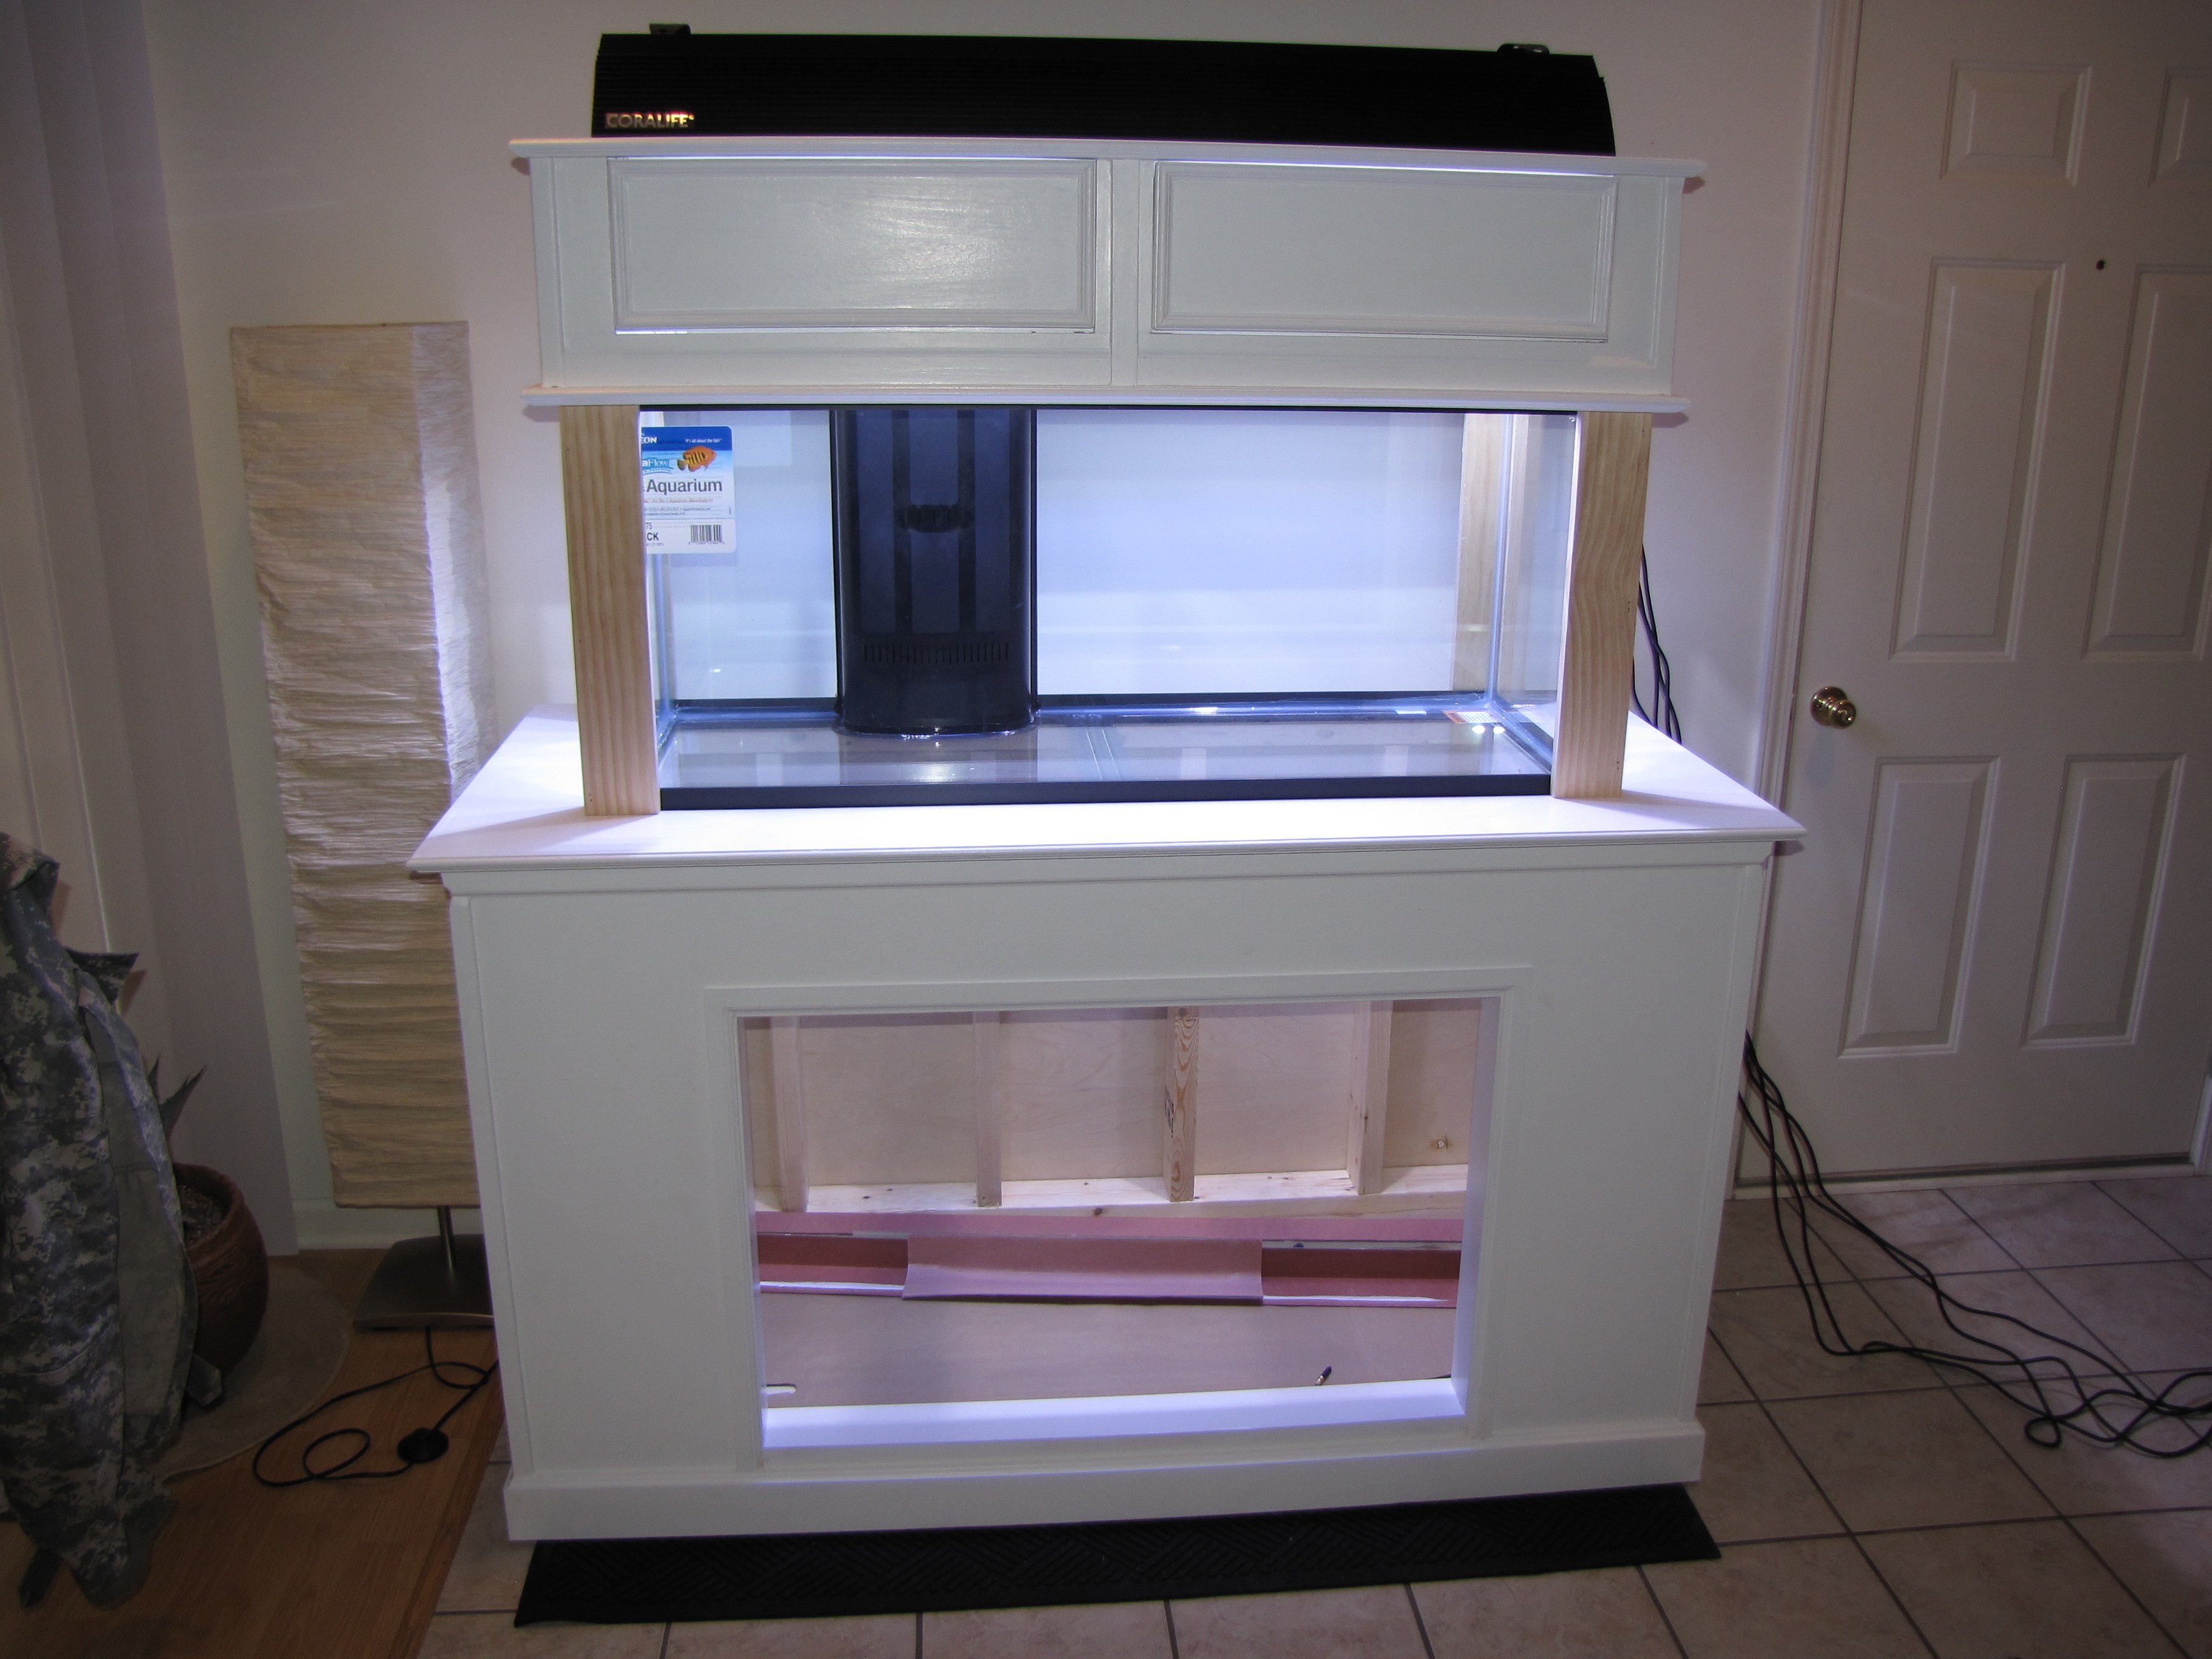 New diy stand and hood | Saltwaterfish Forum